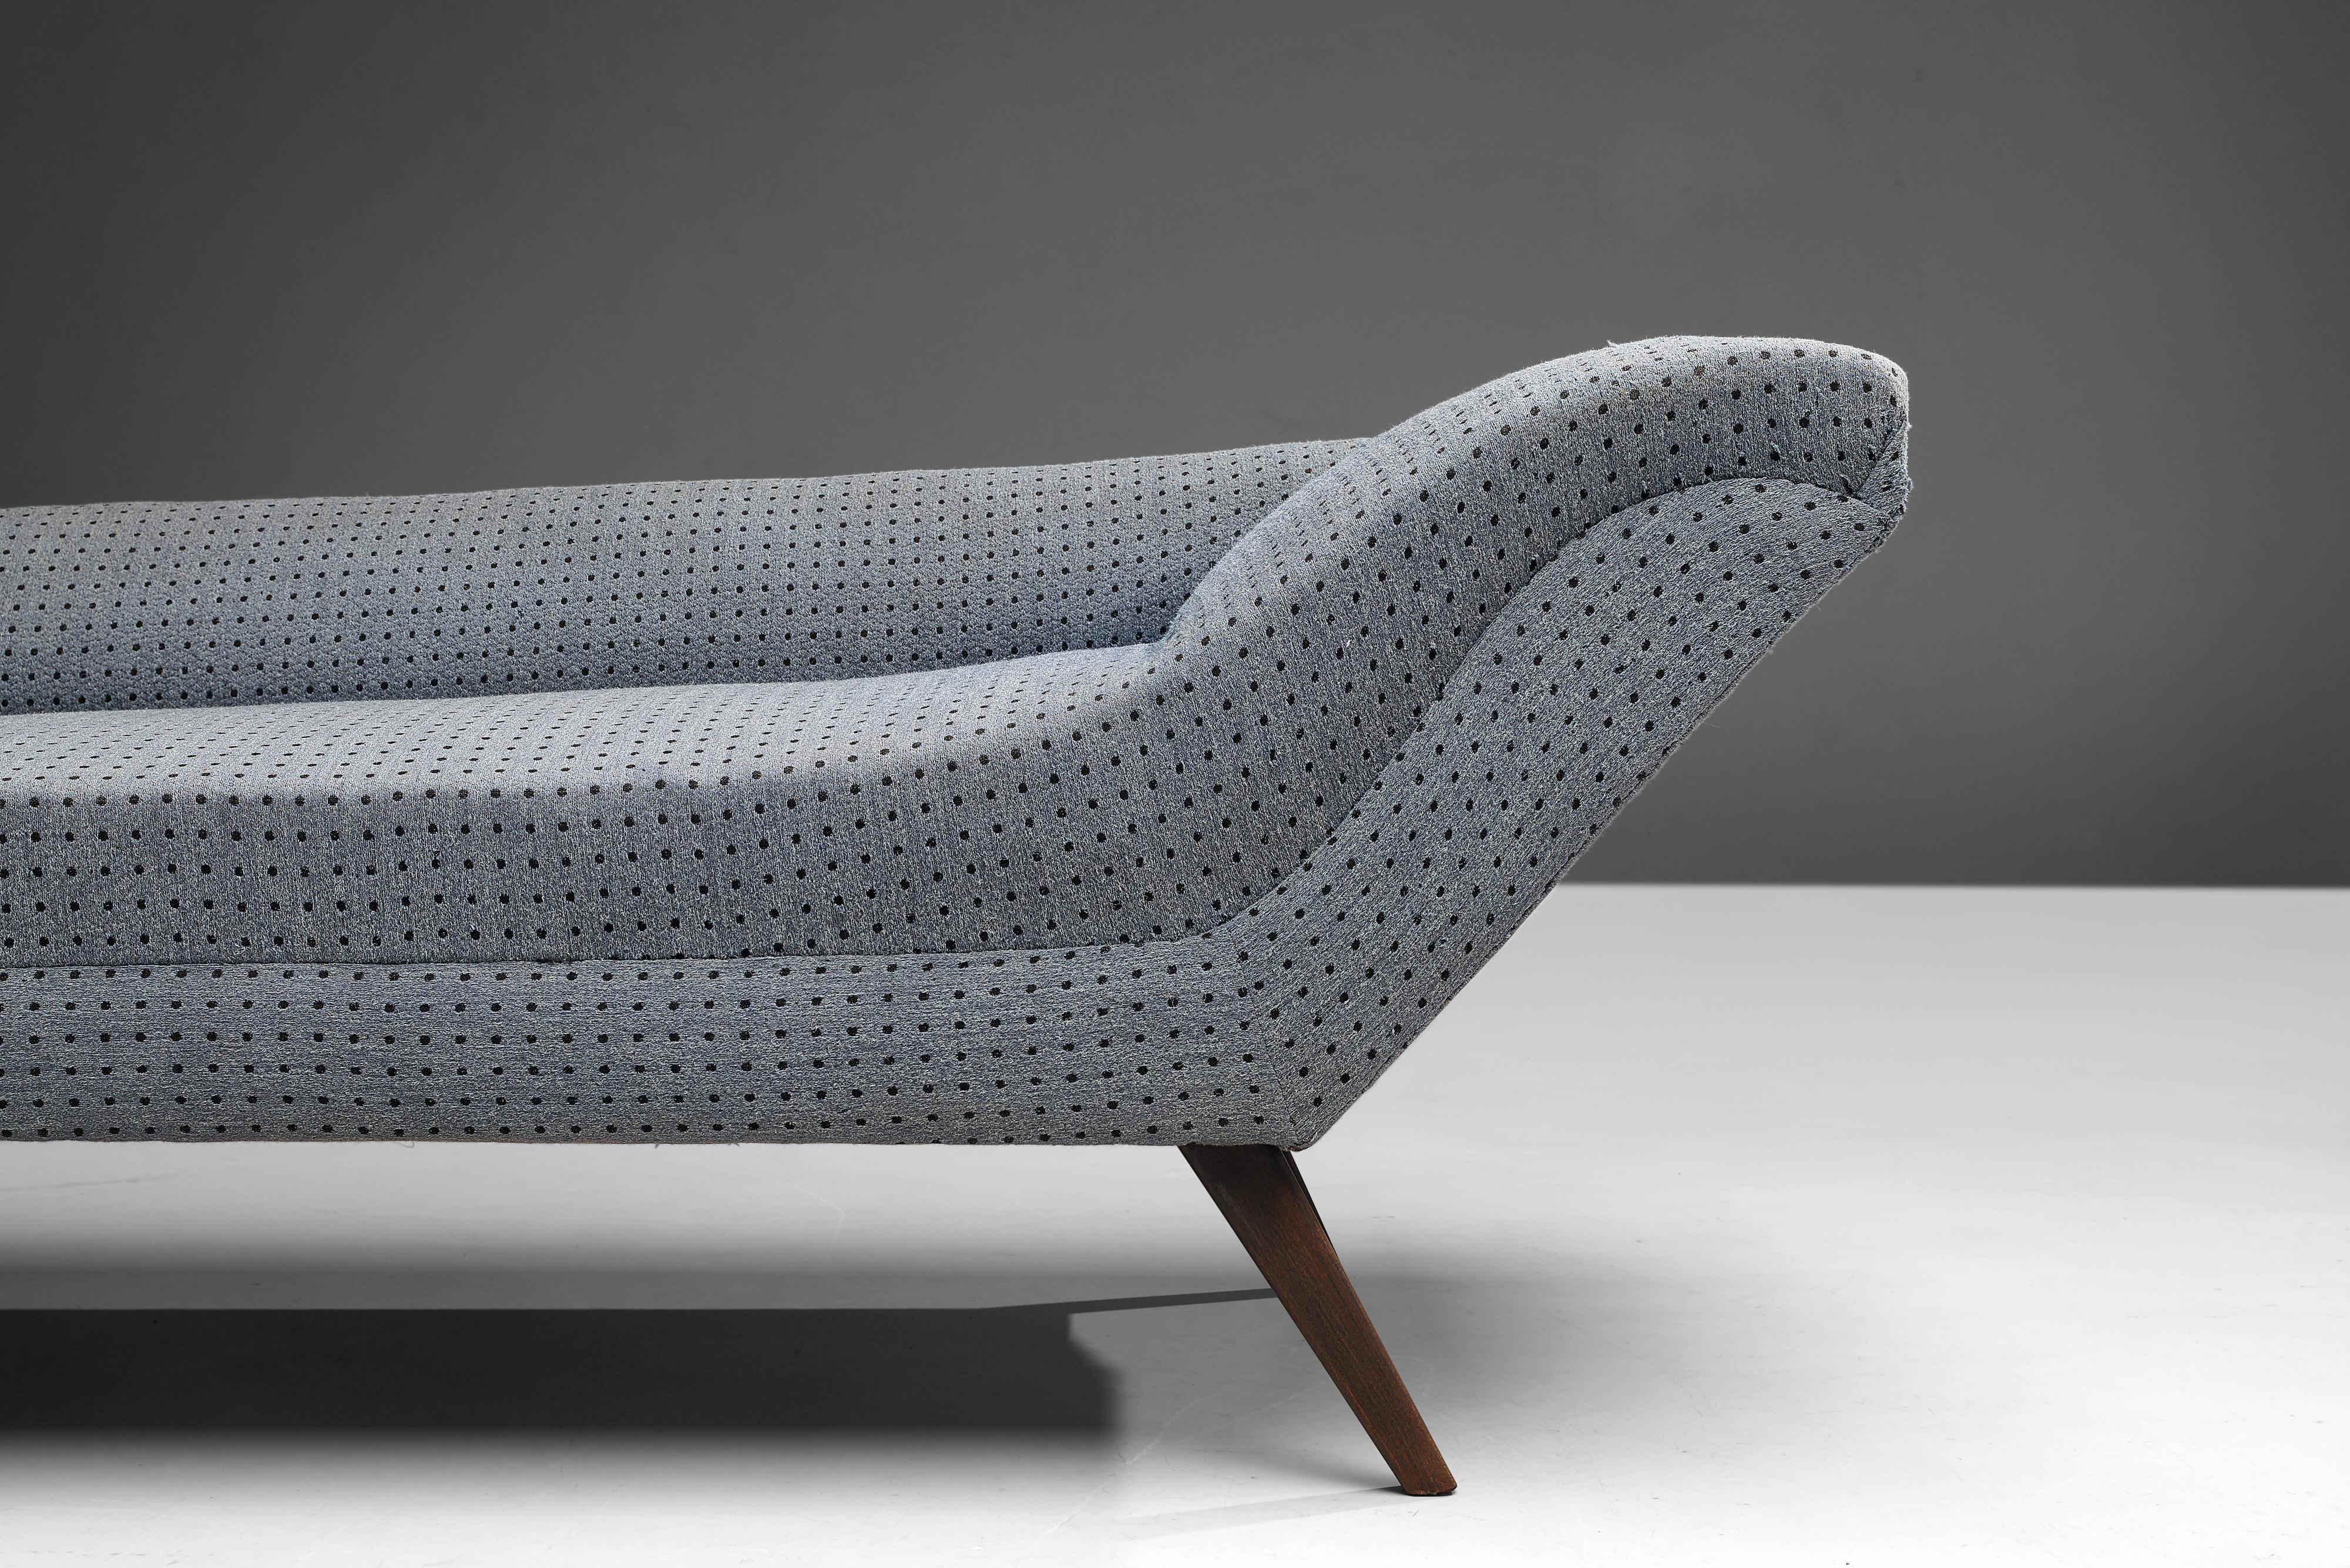 Mid-20th Century Danish Chaise Longue in Ice Blue Dotted Upholstery